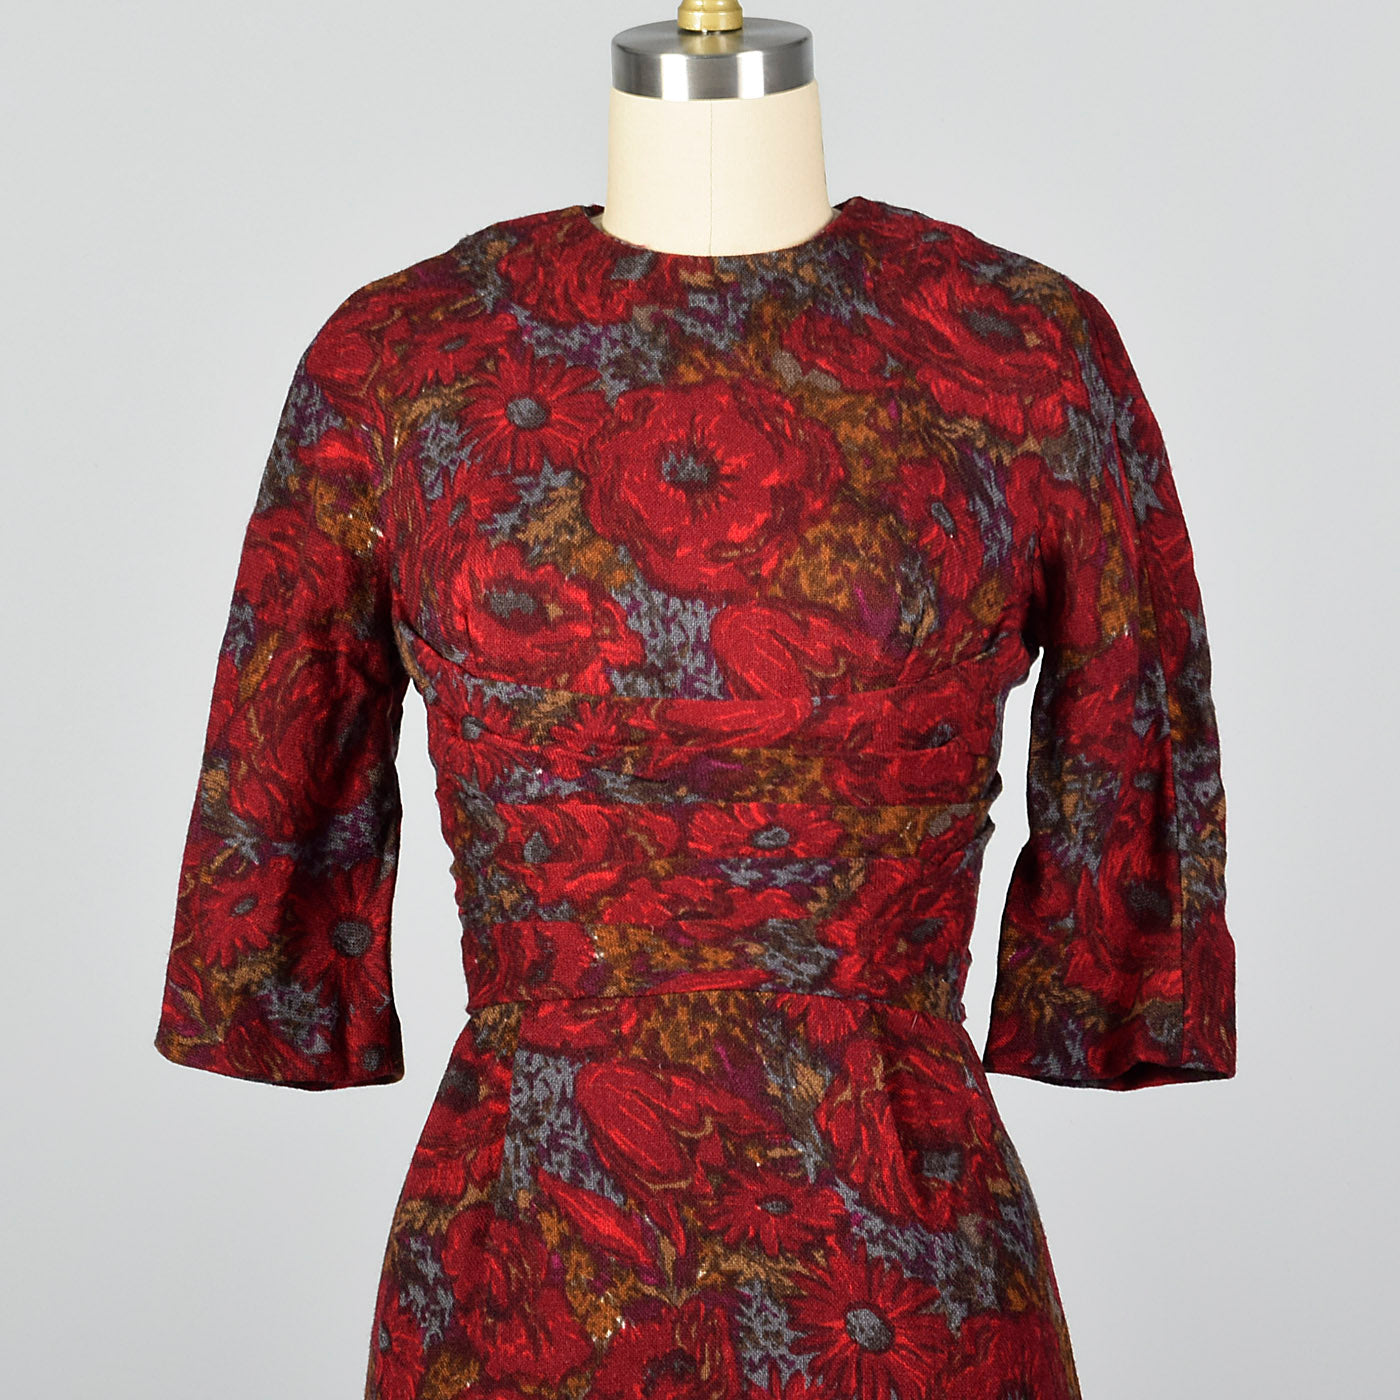 1950s Red Floral Print Dress with Great Silhouette